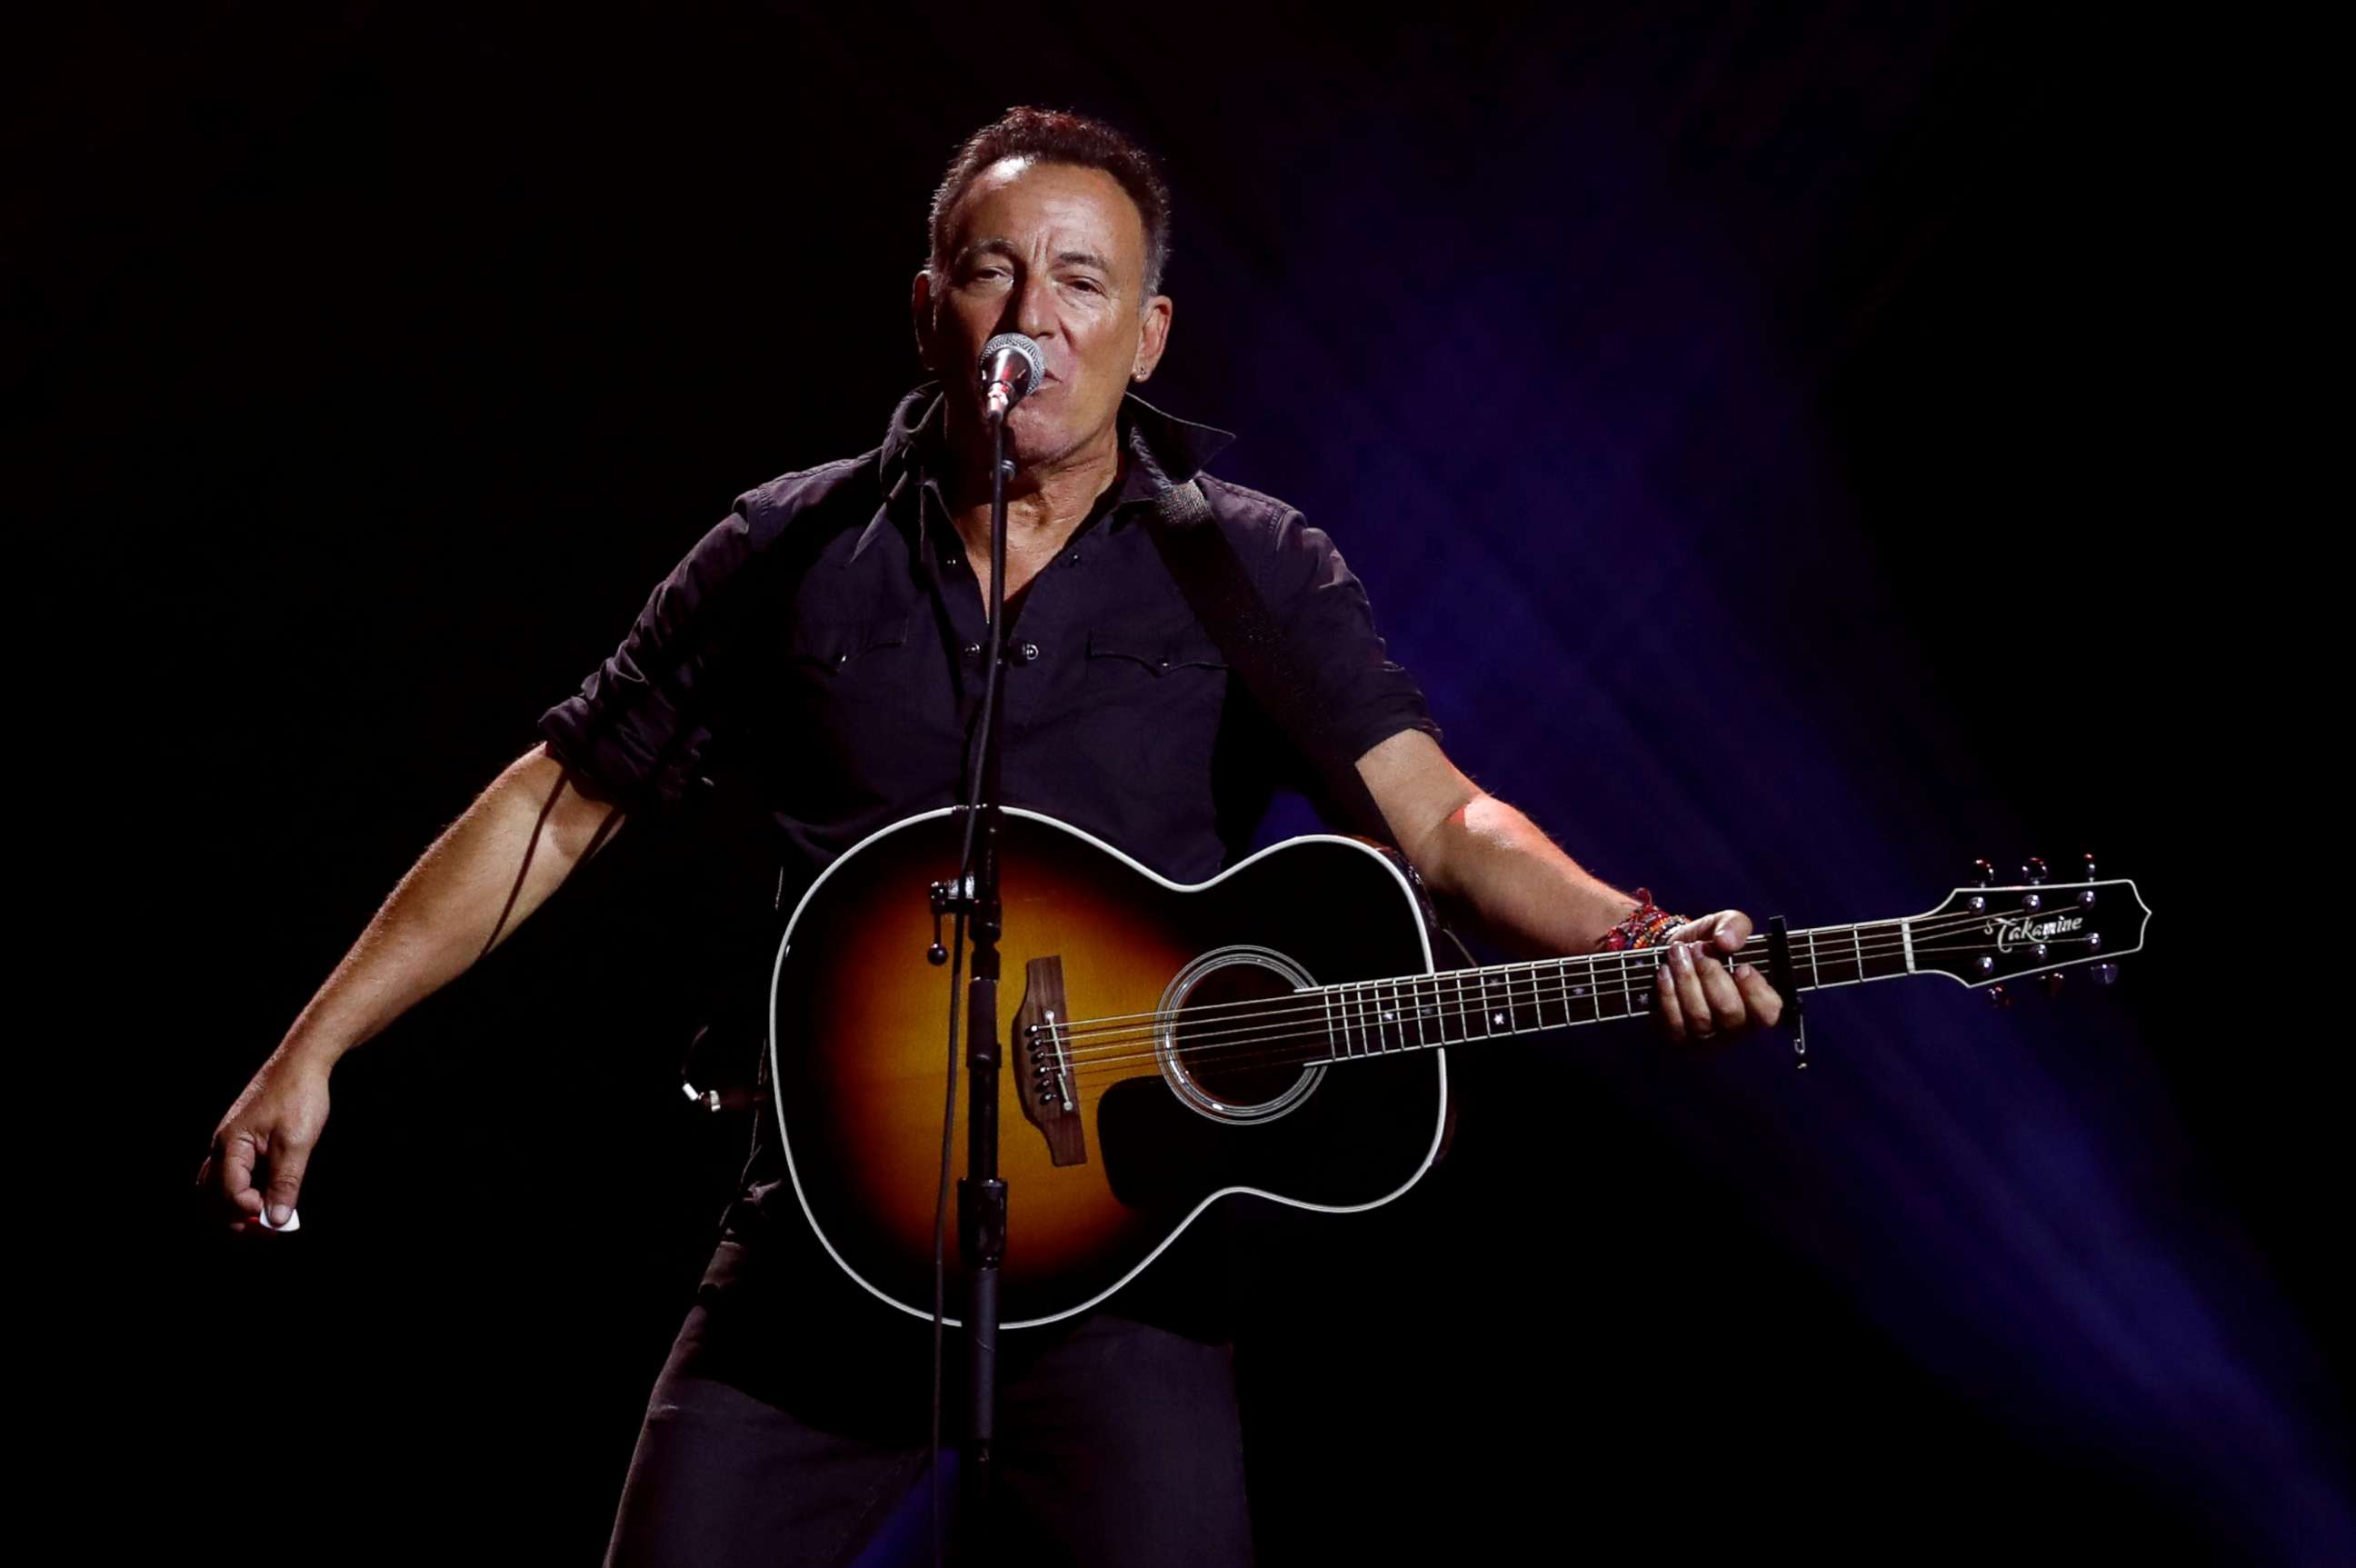 PHOTO: American singer-songwriter Bruce Springsteen performs during the closing ceremony for the Invictus Games in Toronto, Ontario, Canada, on Sept. 30, 2017.